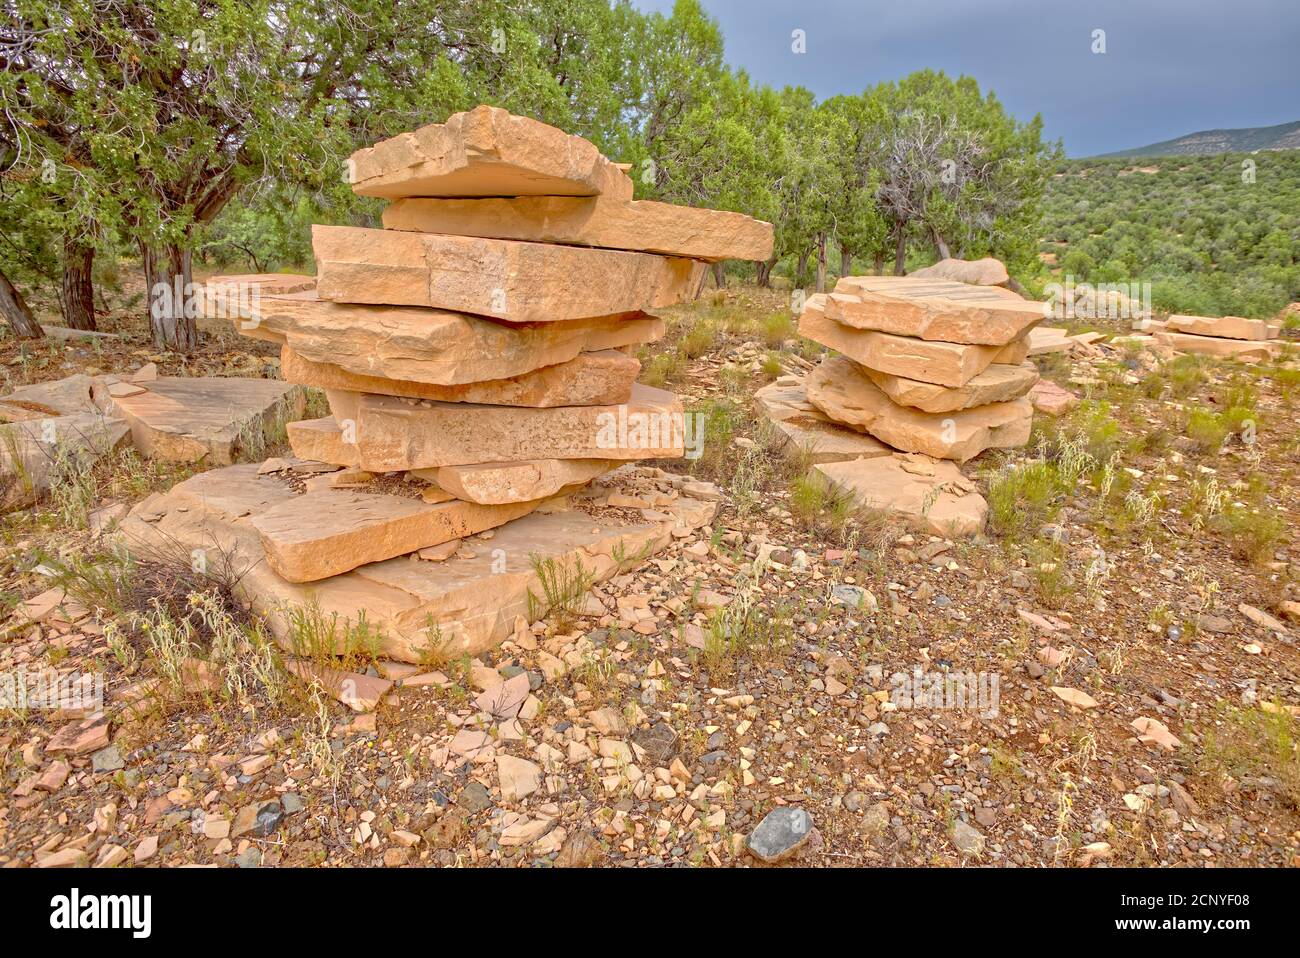 Stacks of stone slabs at the abandoned Mexican Quarry near Perkinsville Arizona. The quarry is on publicly accessible federal land in the Prescott Nat Stock Photo